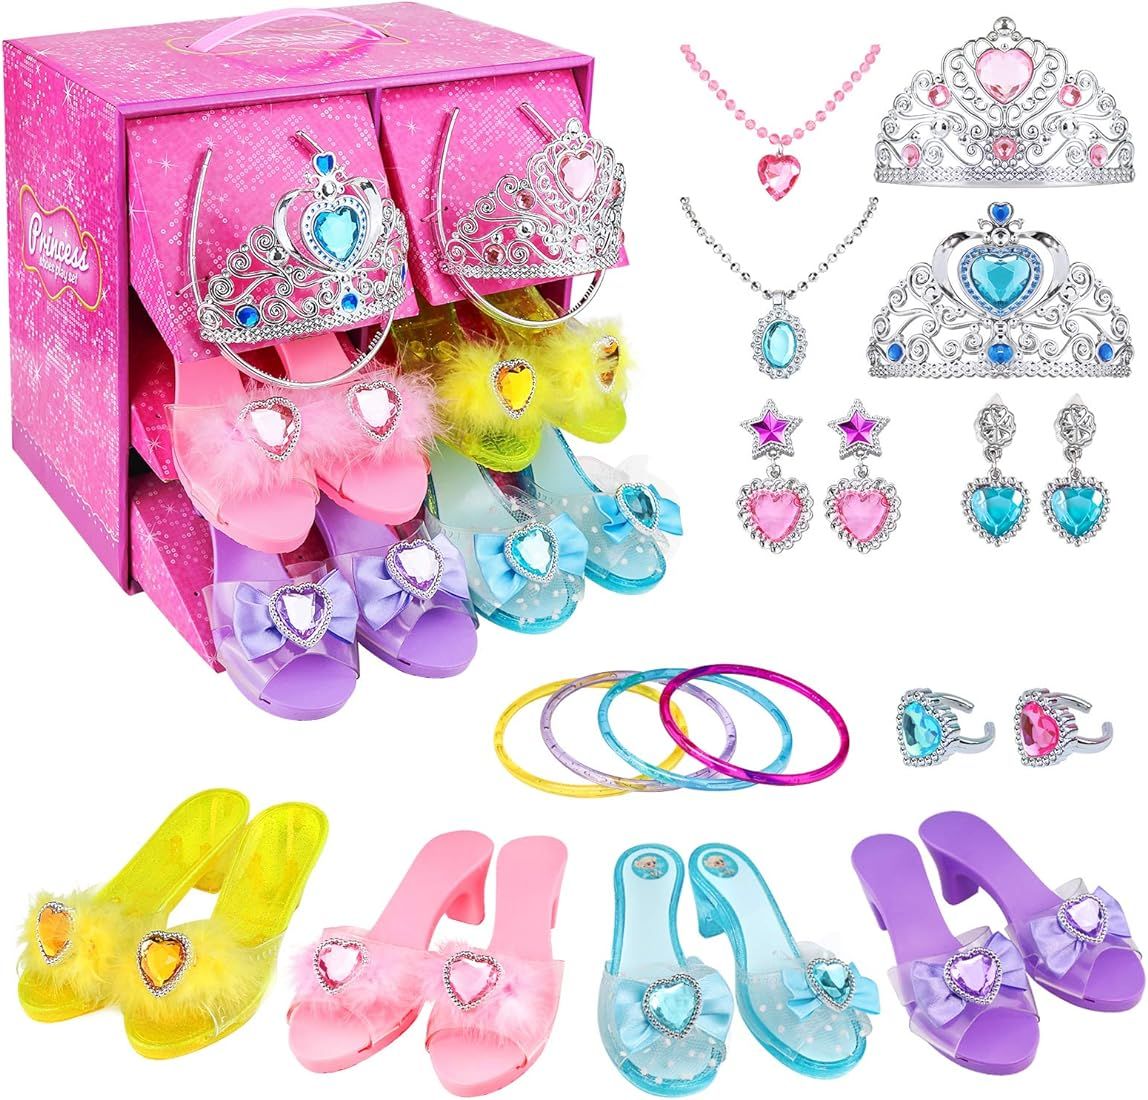 Teuevayl Girls Princess Dress Up Shoes and Jewelry Boutique, Princess Role Play Shoes Collection Set | Amazon (US)